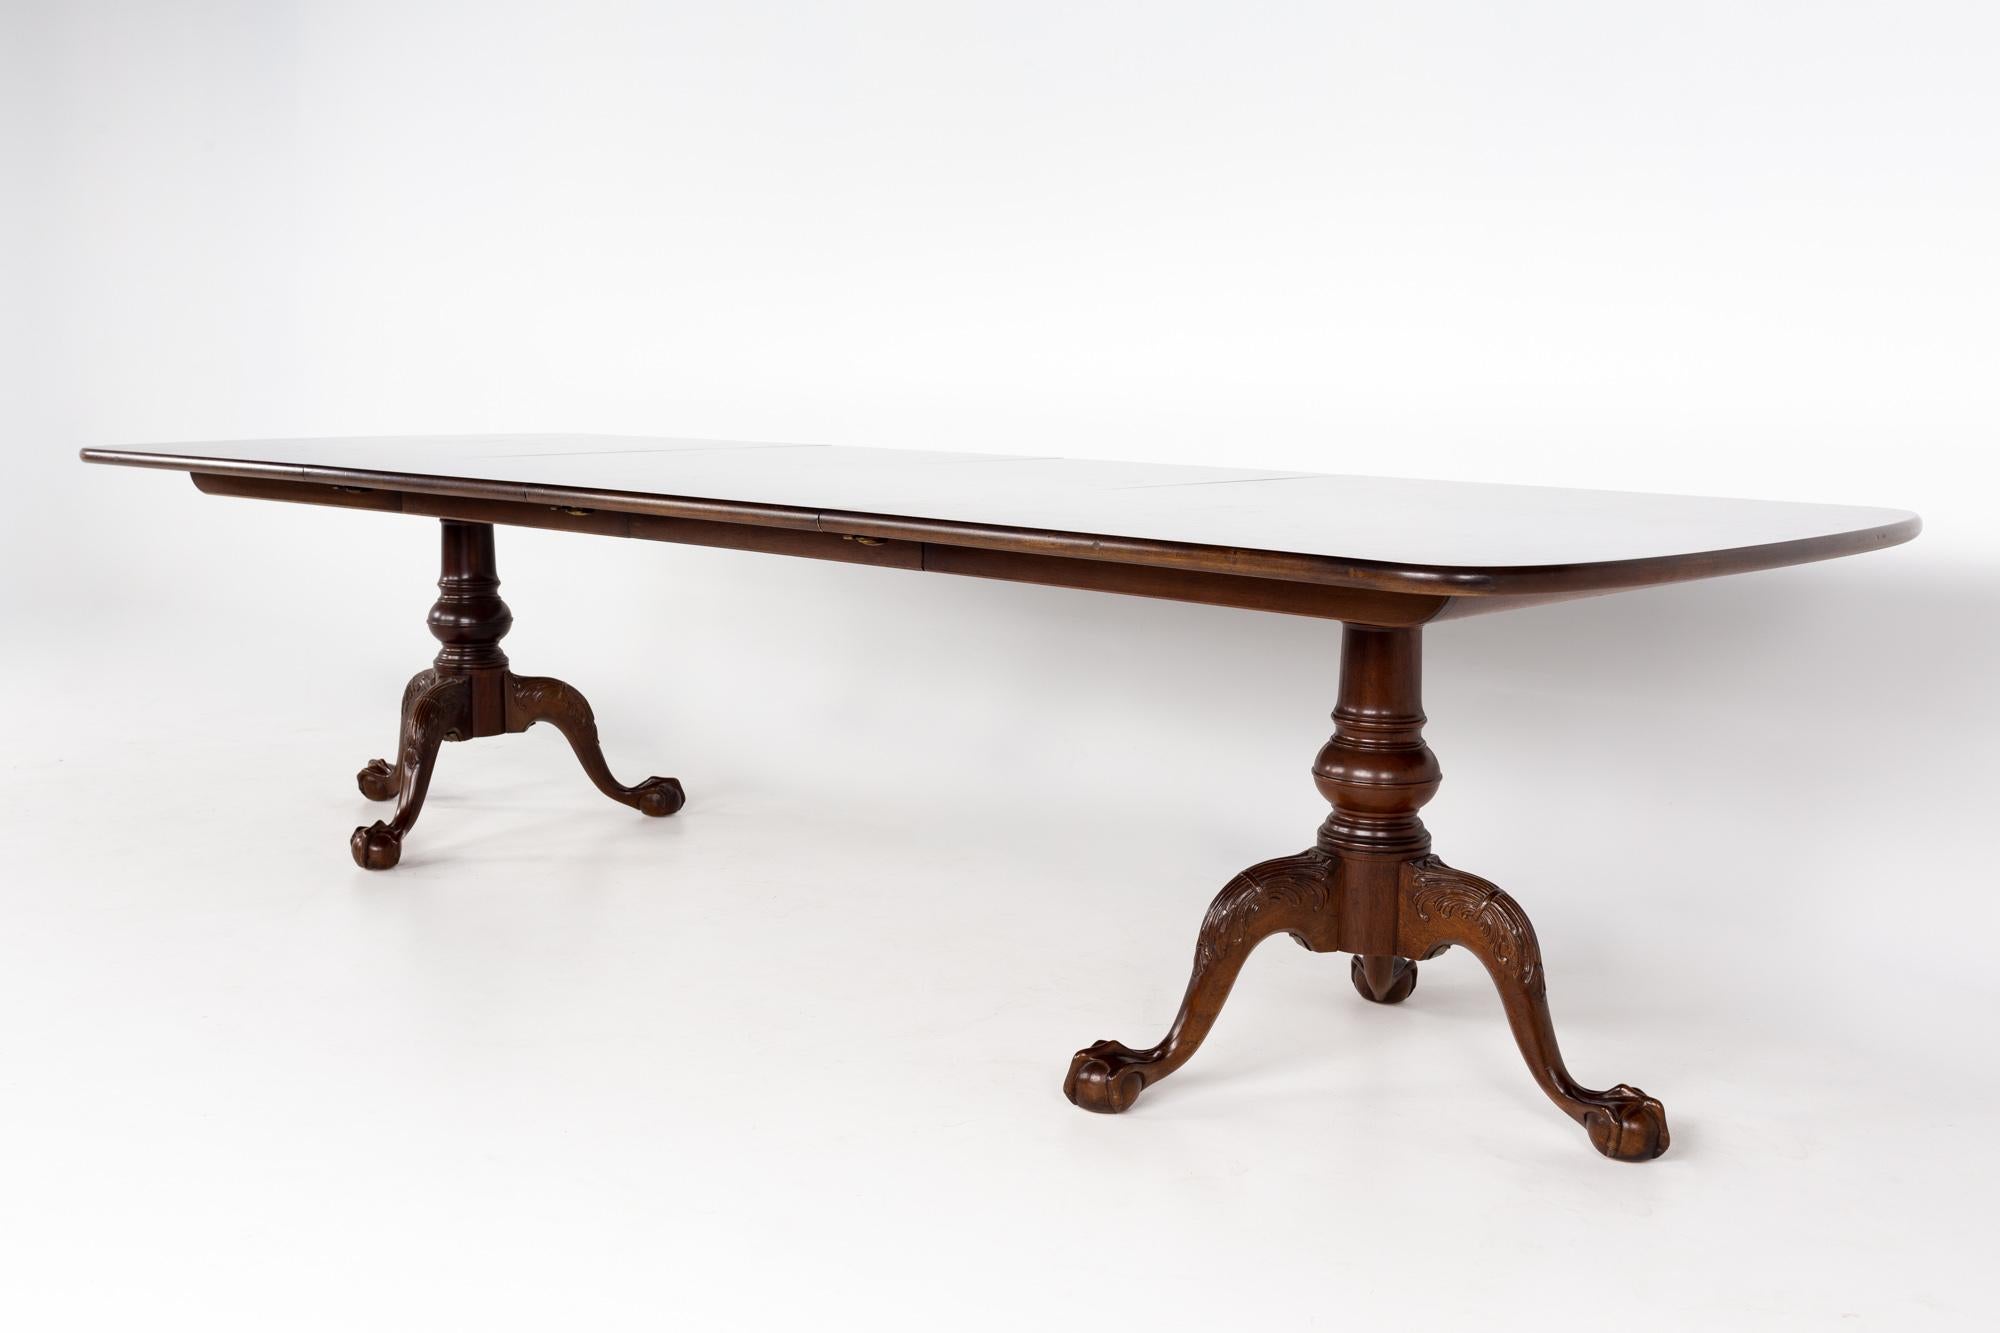 Henredon Aston Court Mahogany Dining Table with 2 Leaves 7